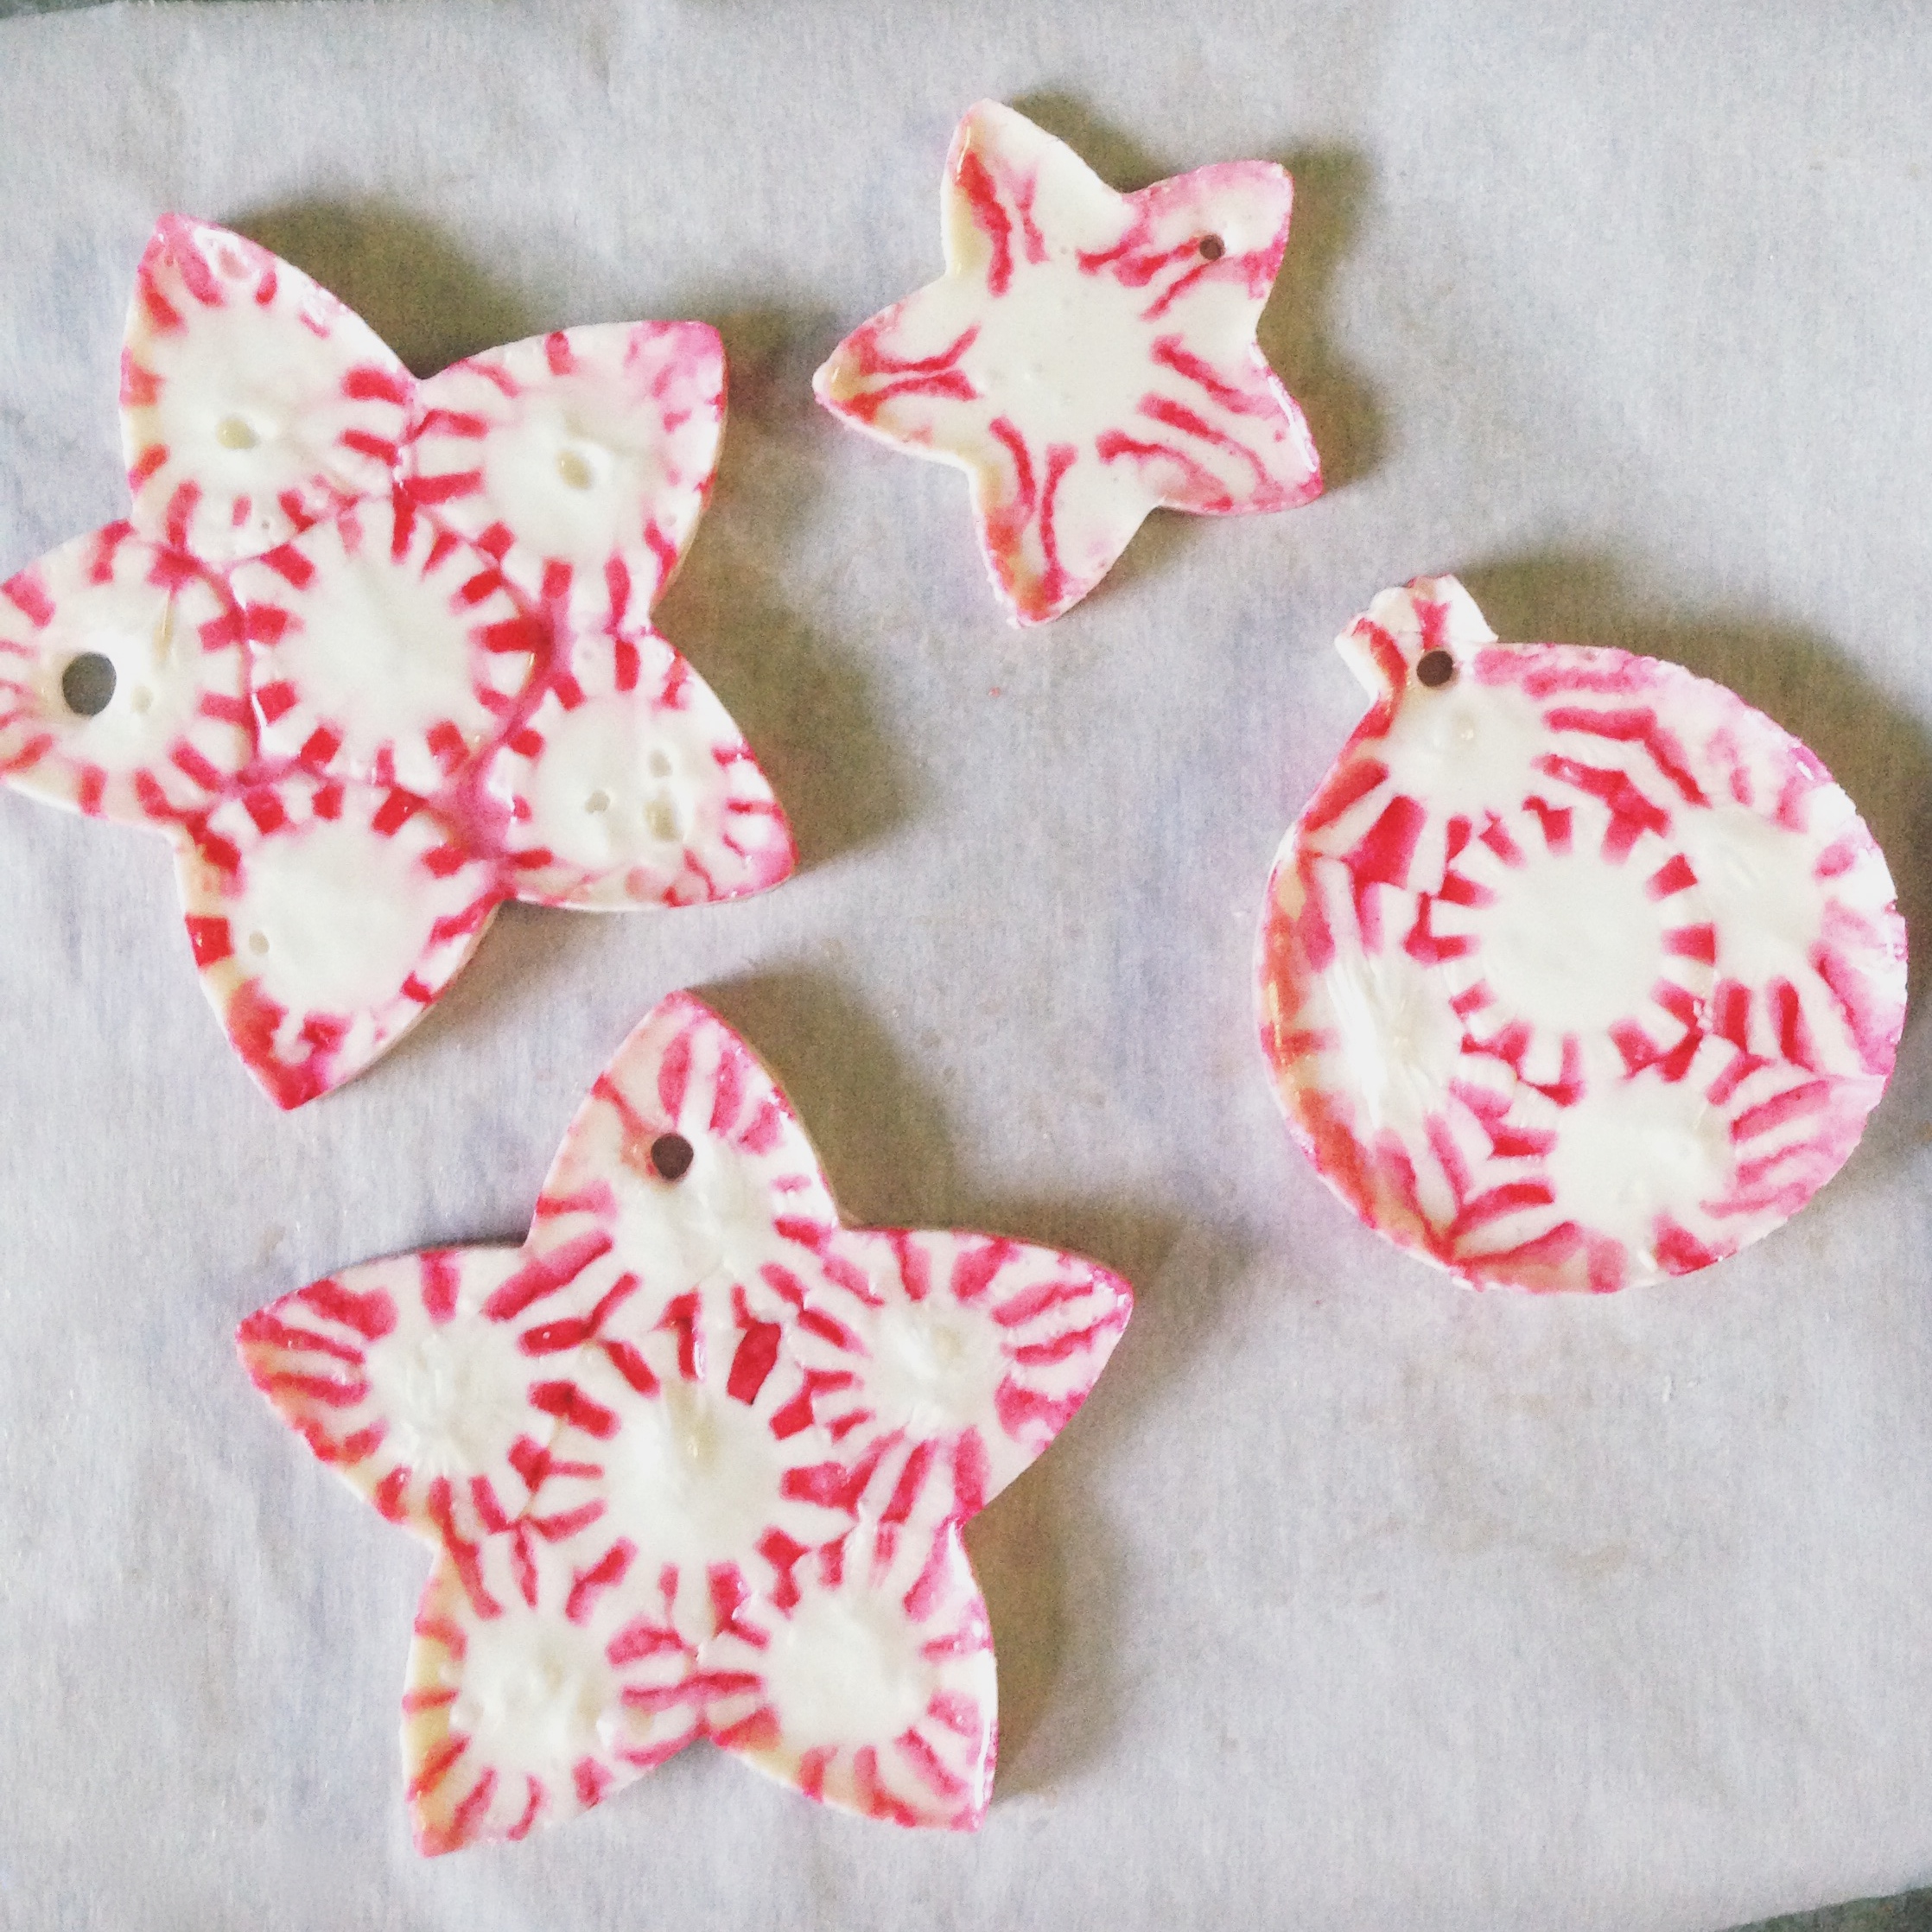 Making Holiday Decorations With Peppermint Candy : 15 Candy Cane Crafts Diy Holiday Decorations With Candy Canes / Hard peppermint candies are first on your supply list for making these pretty edible candy bowls.